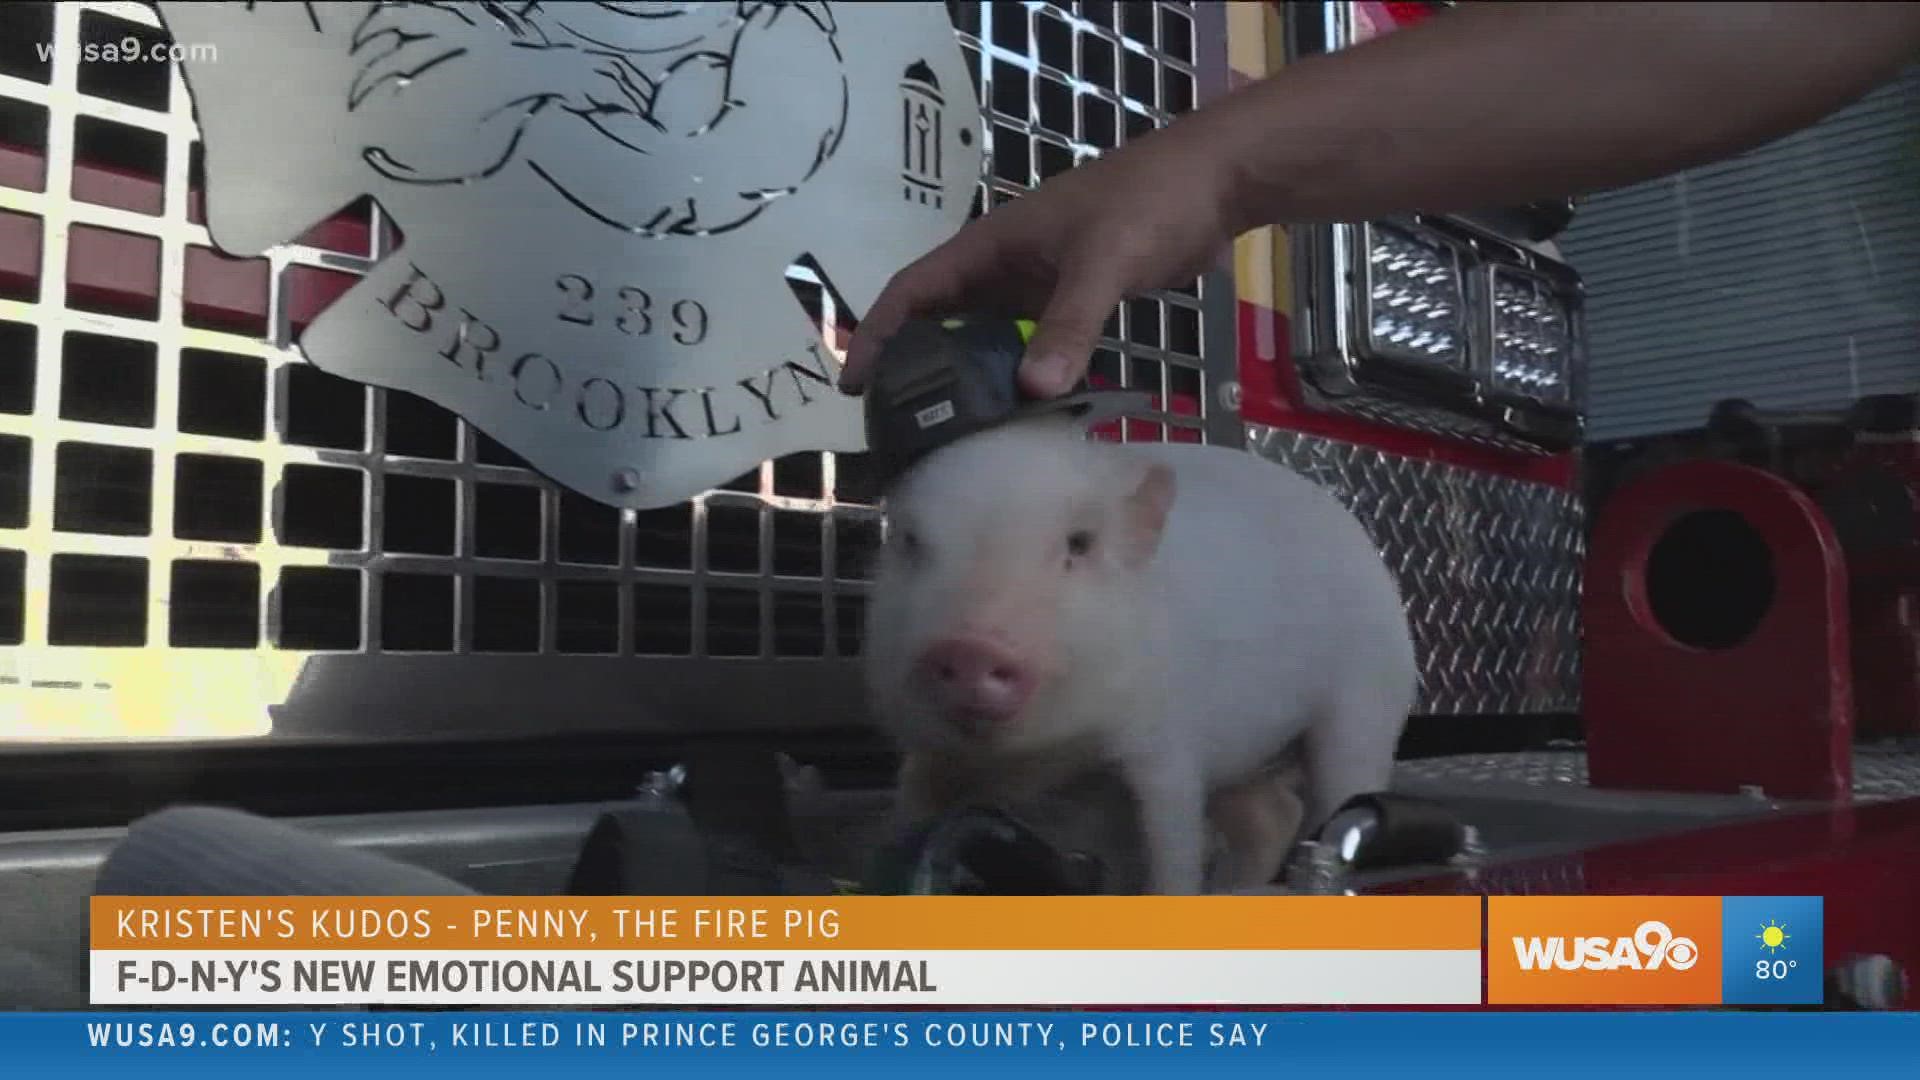 Penny, the fire pig, has become an emotional support animal for a Brooklyn, New York firehouse and it's community. Kristen's Kudos for Aug. 27, 2021